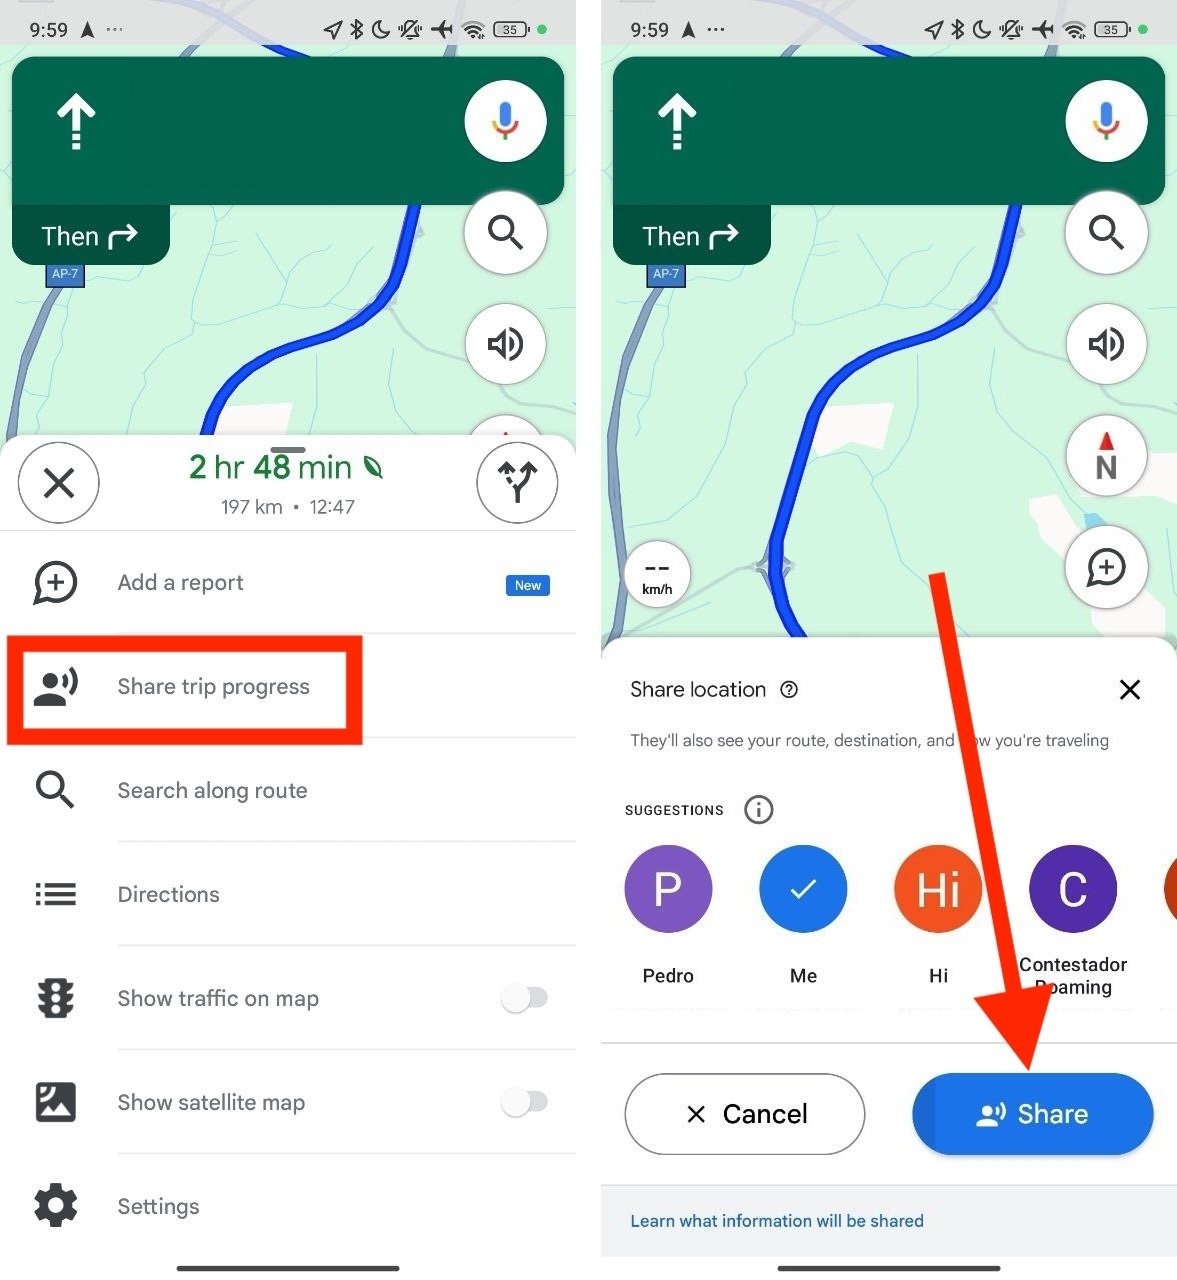 Sending your location in Google Maps when heading towards your destination